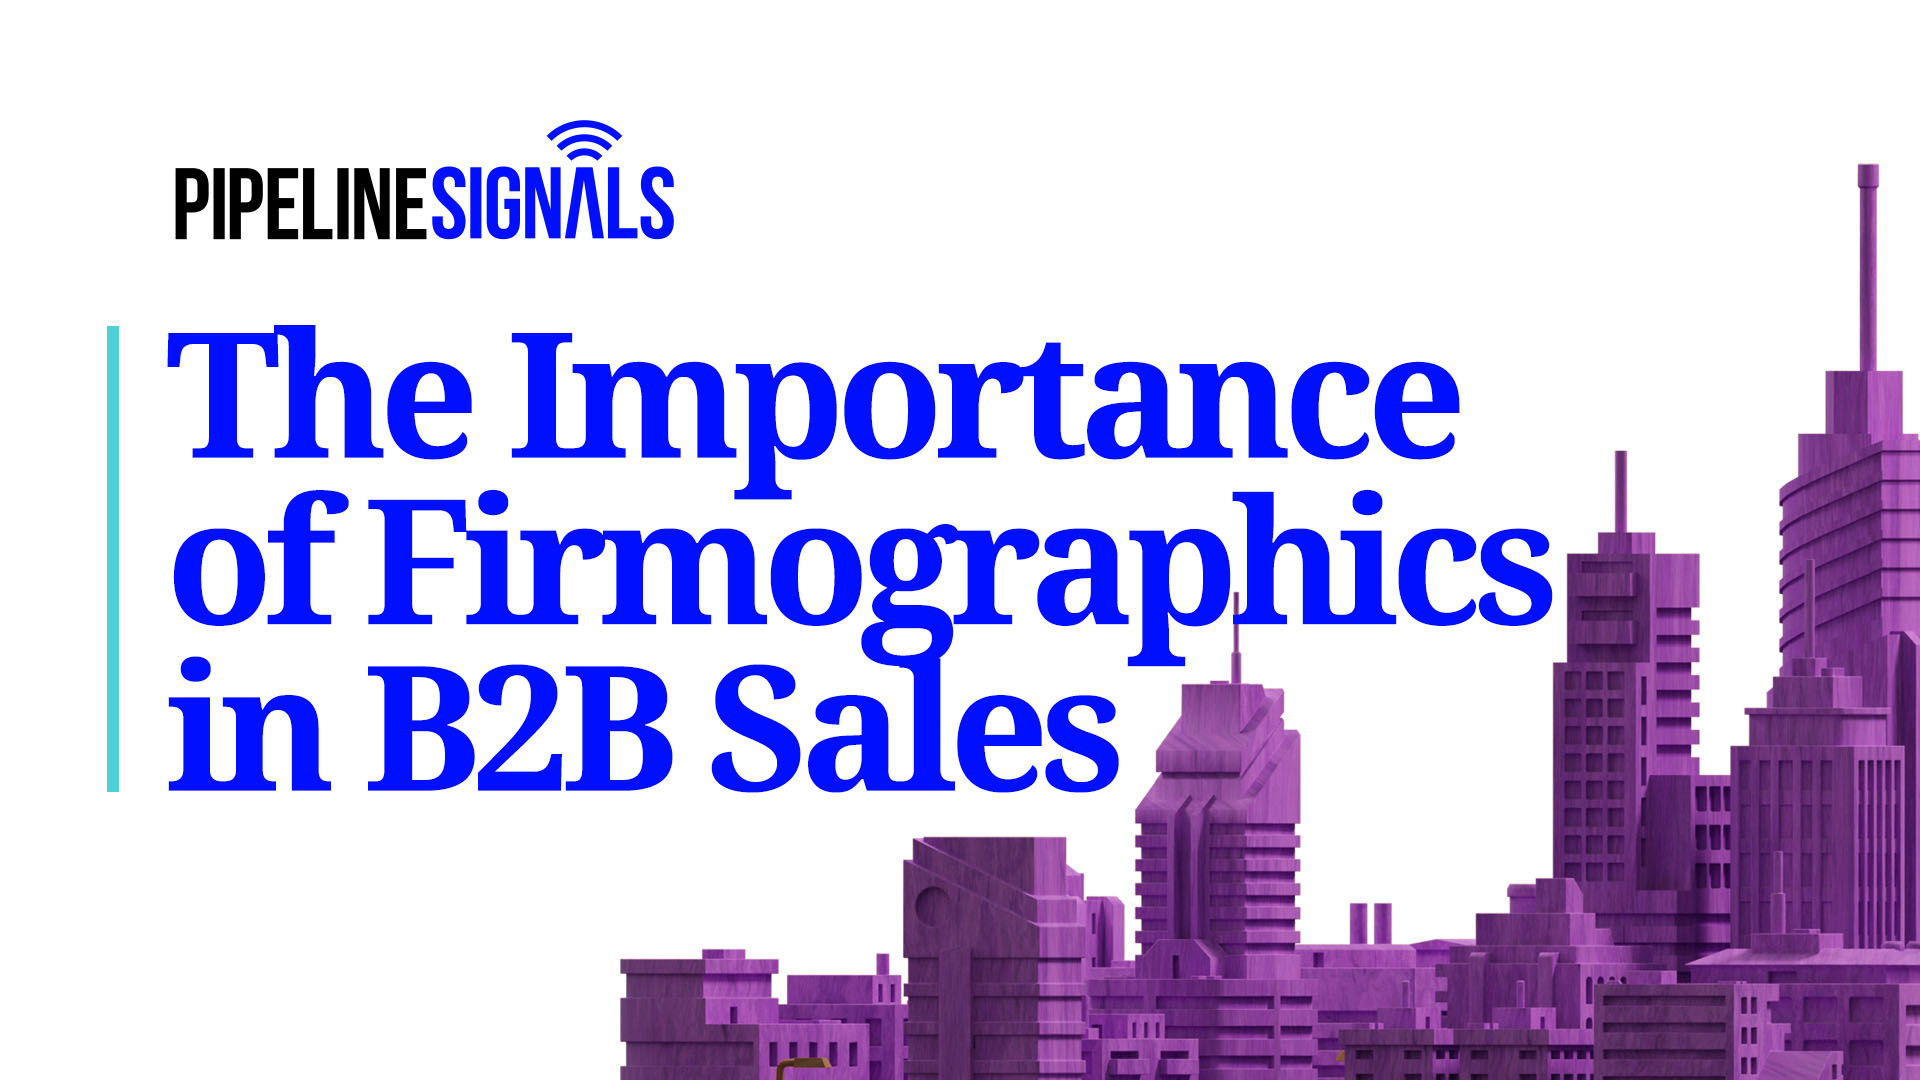 The importance of firmographics in B2B sales